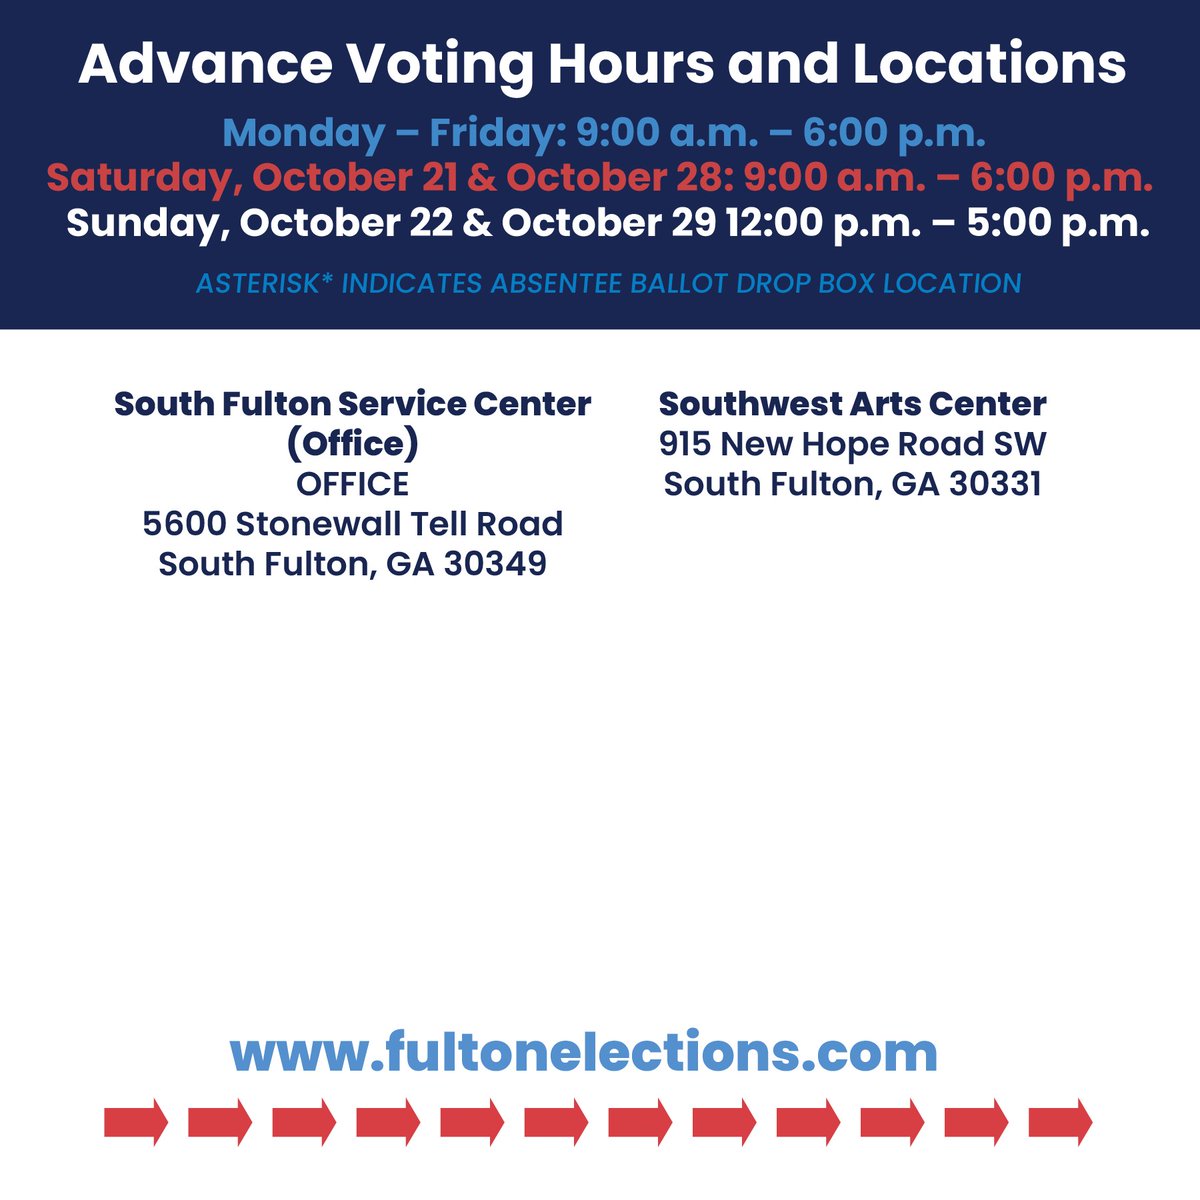 #EarlyVoting starts TODAY (October 16) through Friday, November 3. Beat the lines on Election Day, November 7, and cast your vote! Visit fultonelections.com for more information, including weekend voting hours and locations.

#UnionCityVotes #FultonVotes #VoteYourVoice